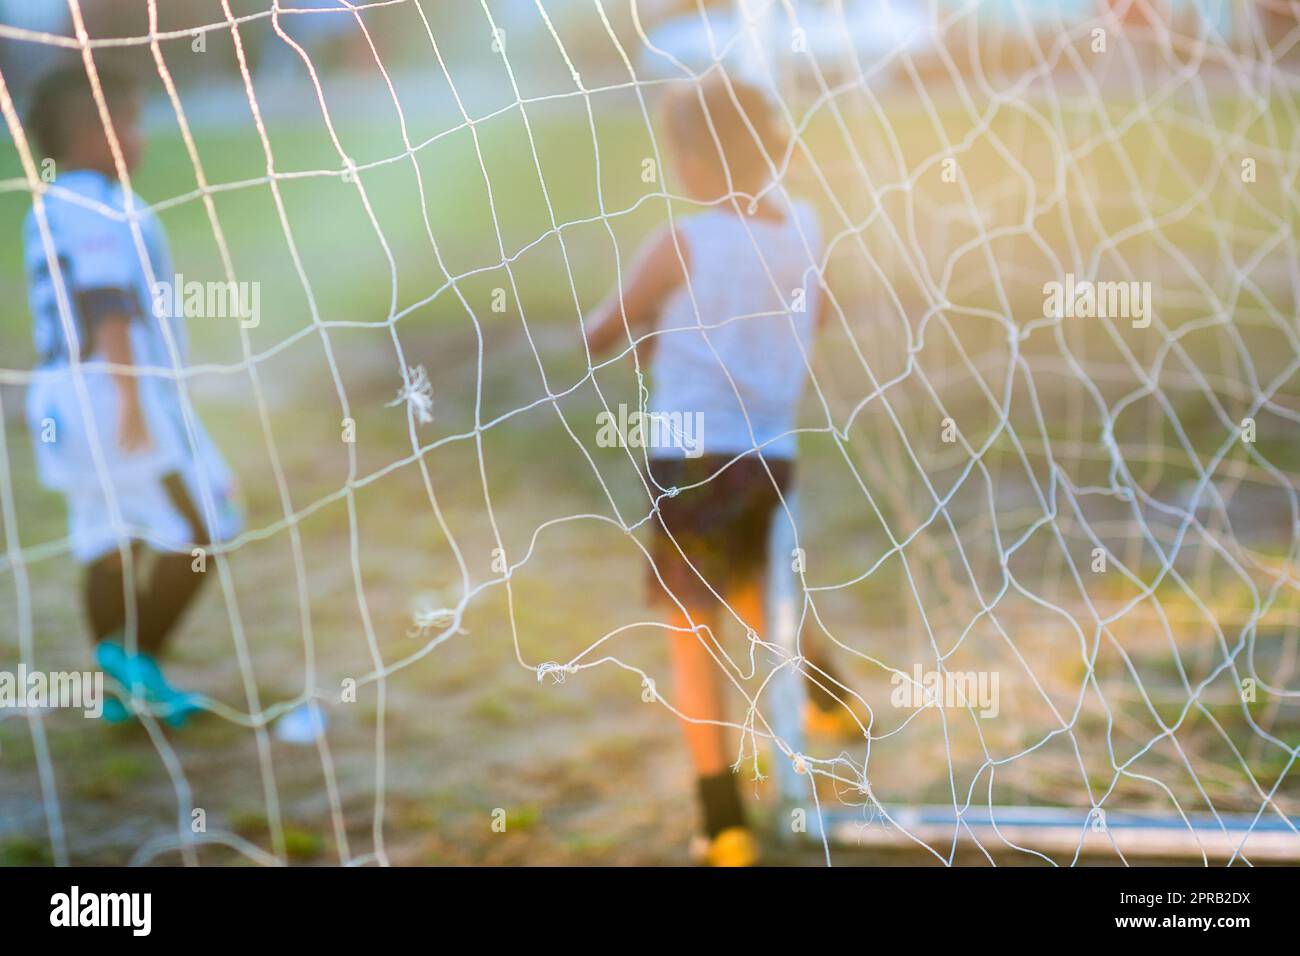 A young Colombian female football player leans against the goal post bar during a training session in Necoclí, Antioquia, Colombia. Stock Photo